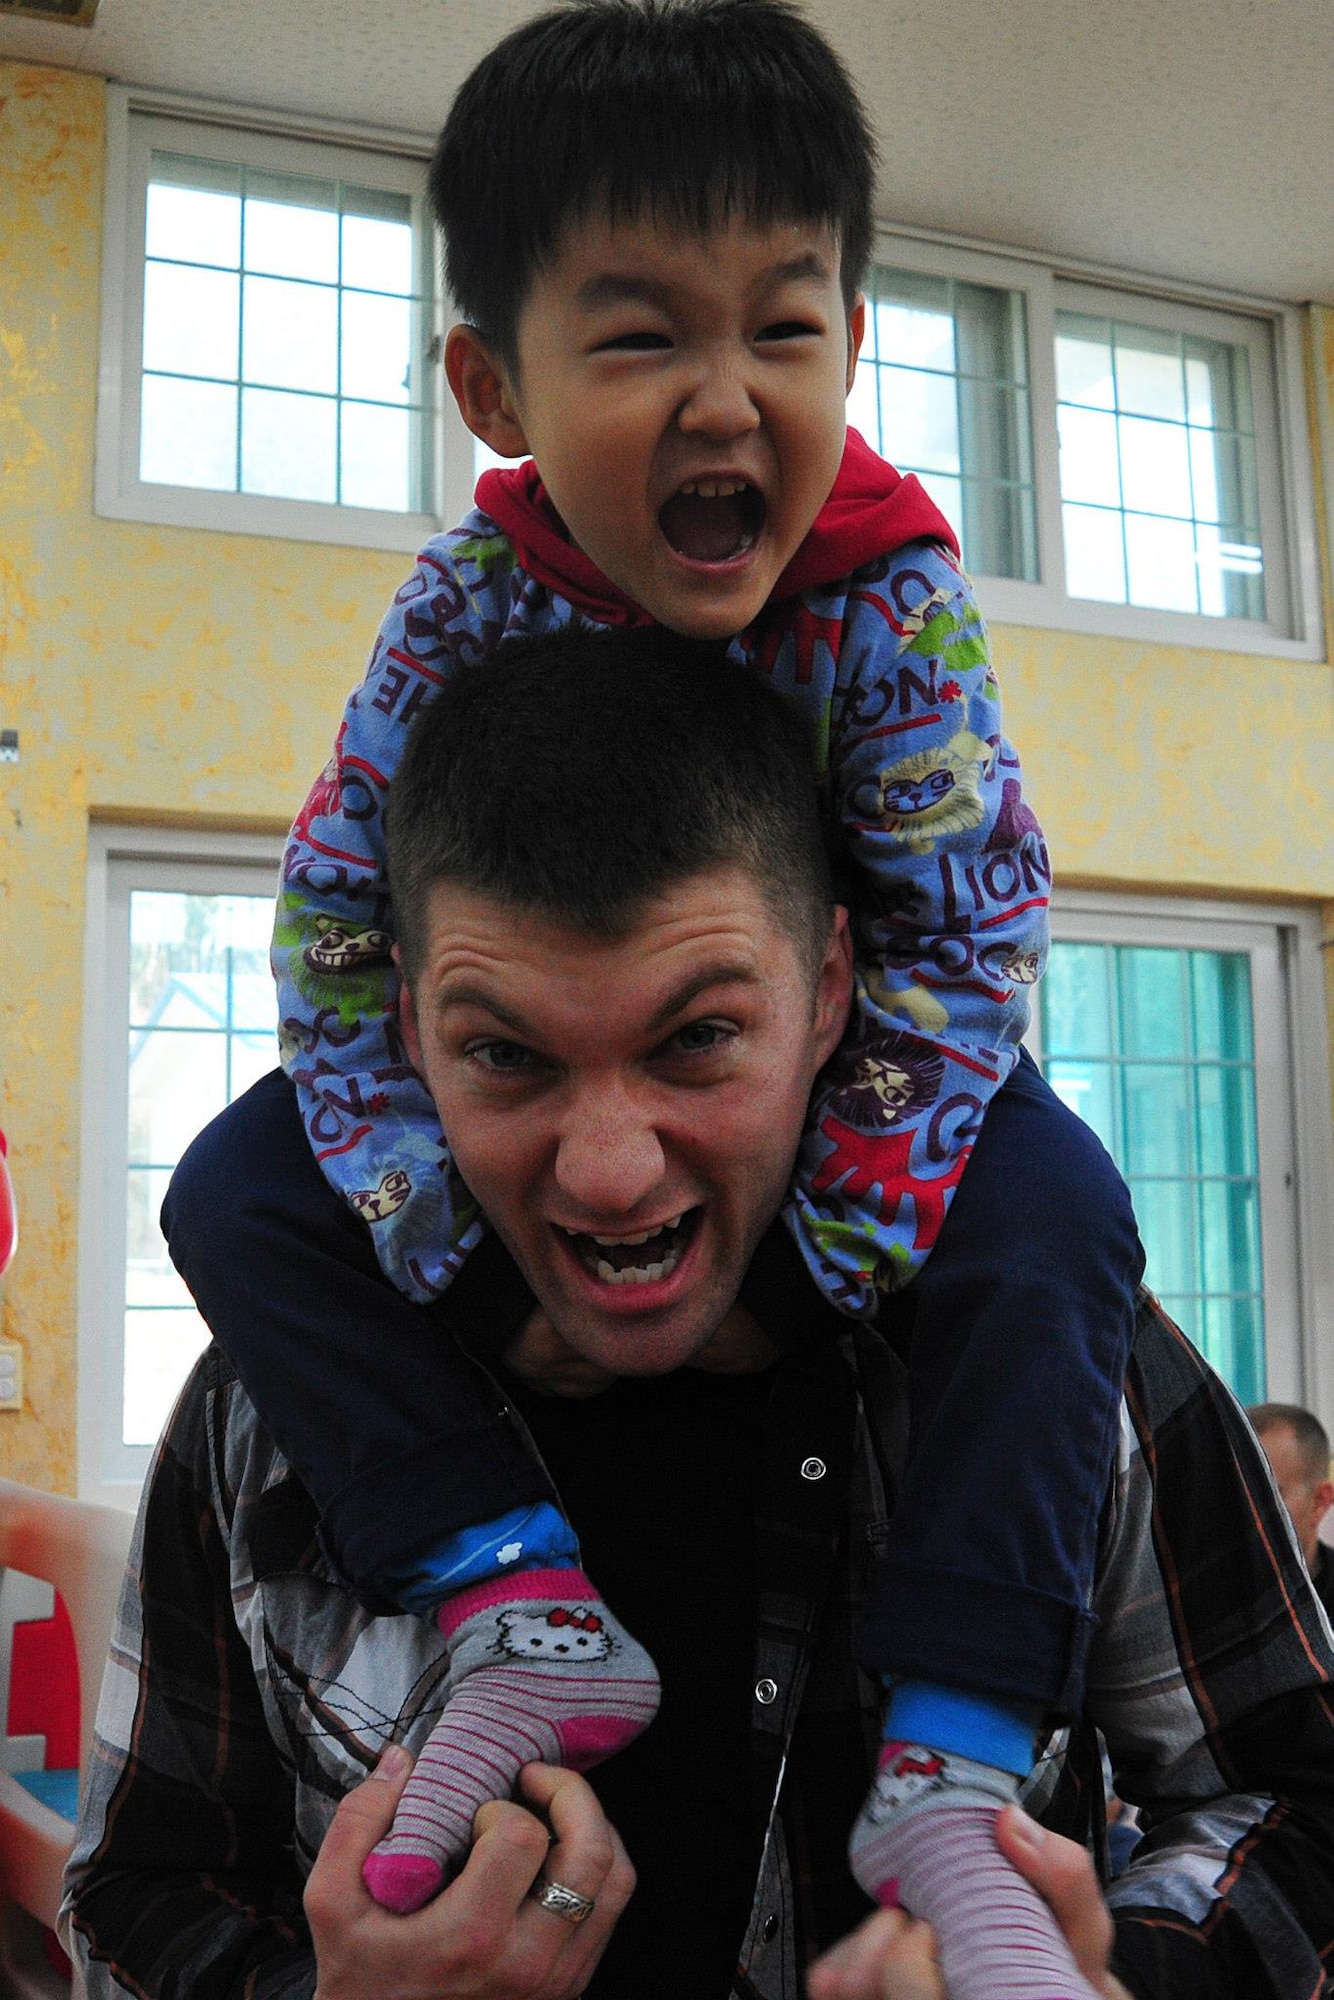 An Airman from the 120th Expeditionary Aircraft Maintenance Unit plays with a toddler at the Moses Infant Home in Gunsan City, Republic of Korea, March 21, 2015. Thirty-five Airmen from the 8th Fighter Wing and the deployed 120th Expeditionary Aircraft Maintenance Unit volunteered at the home to spend time with the children living there. (U.S. Air Force photo by Capt. Reba Good/Released)